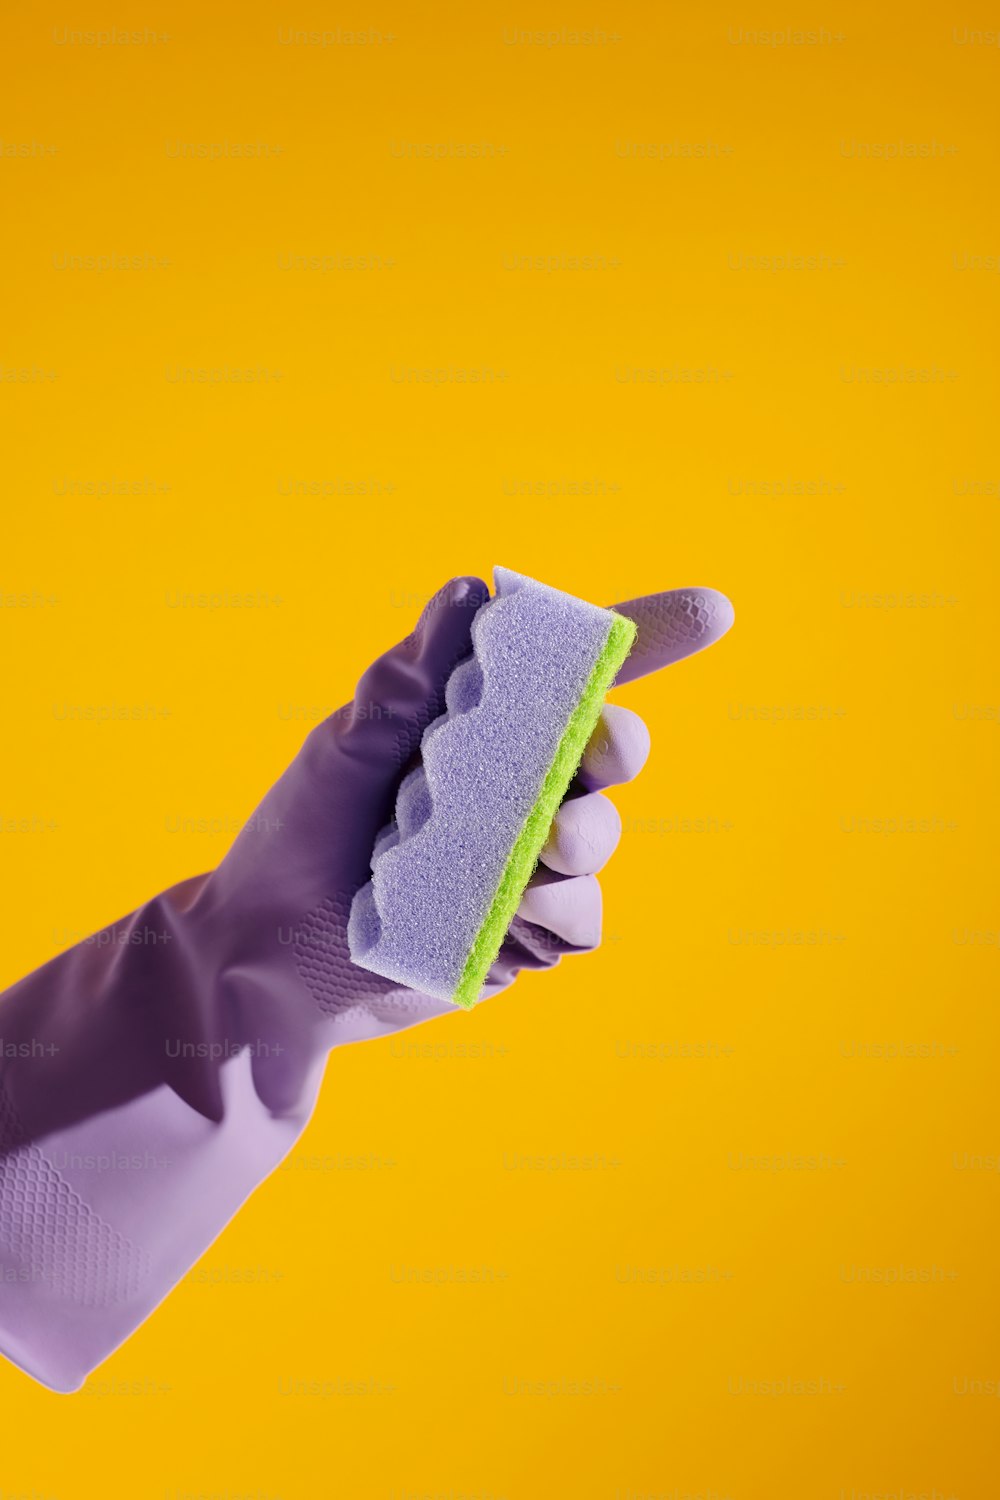 a purple glove holding a sponge on a yellow background